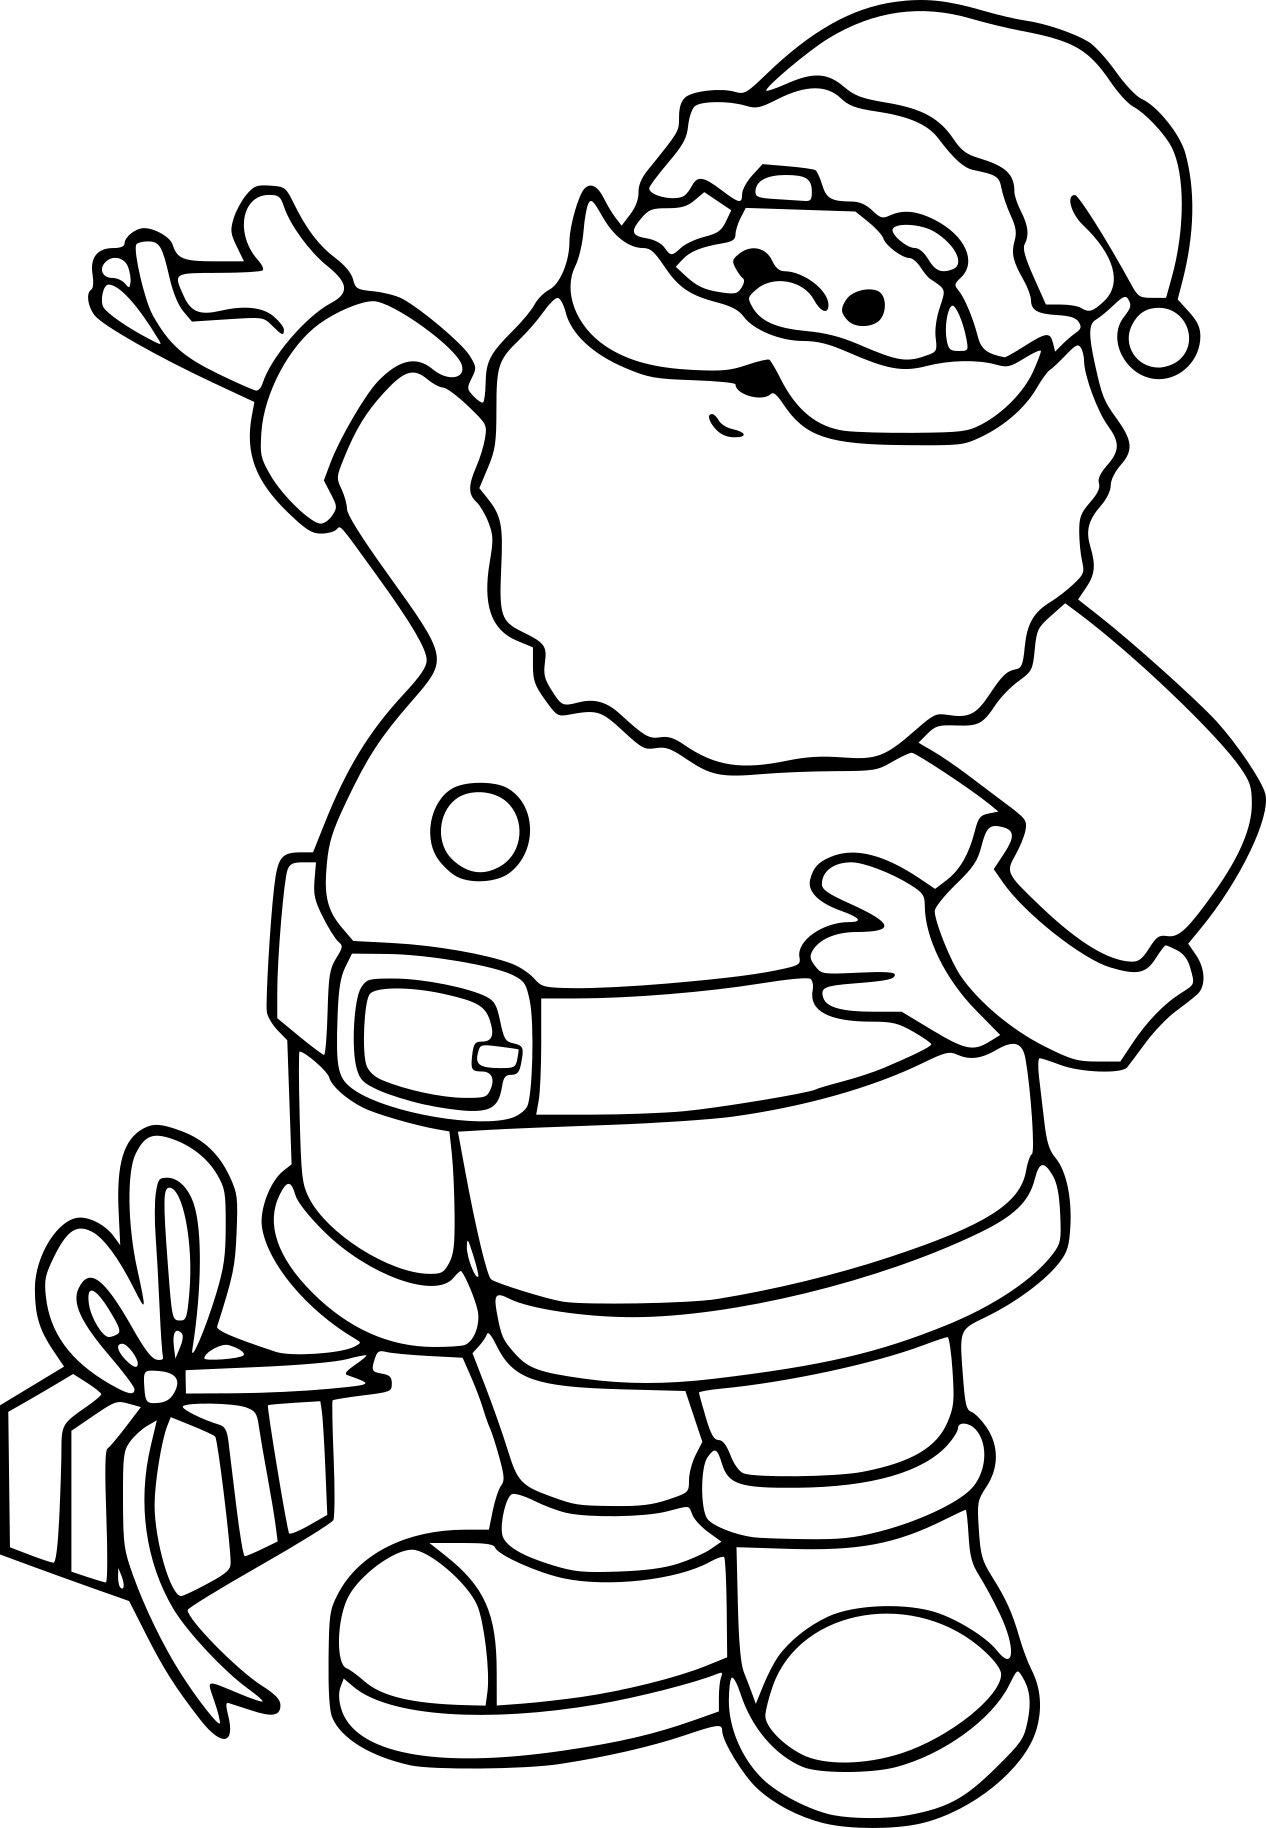 Santa Claus coloring page - free printable coloring pages on coloori.com